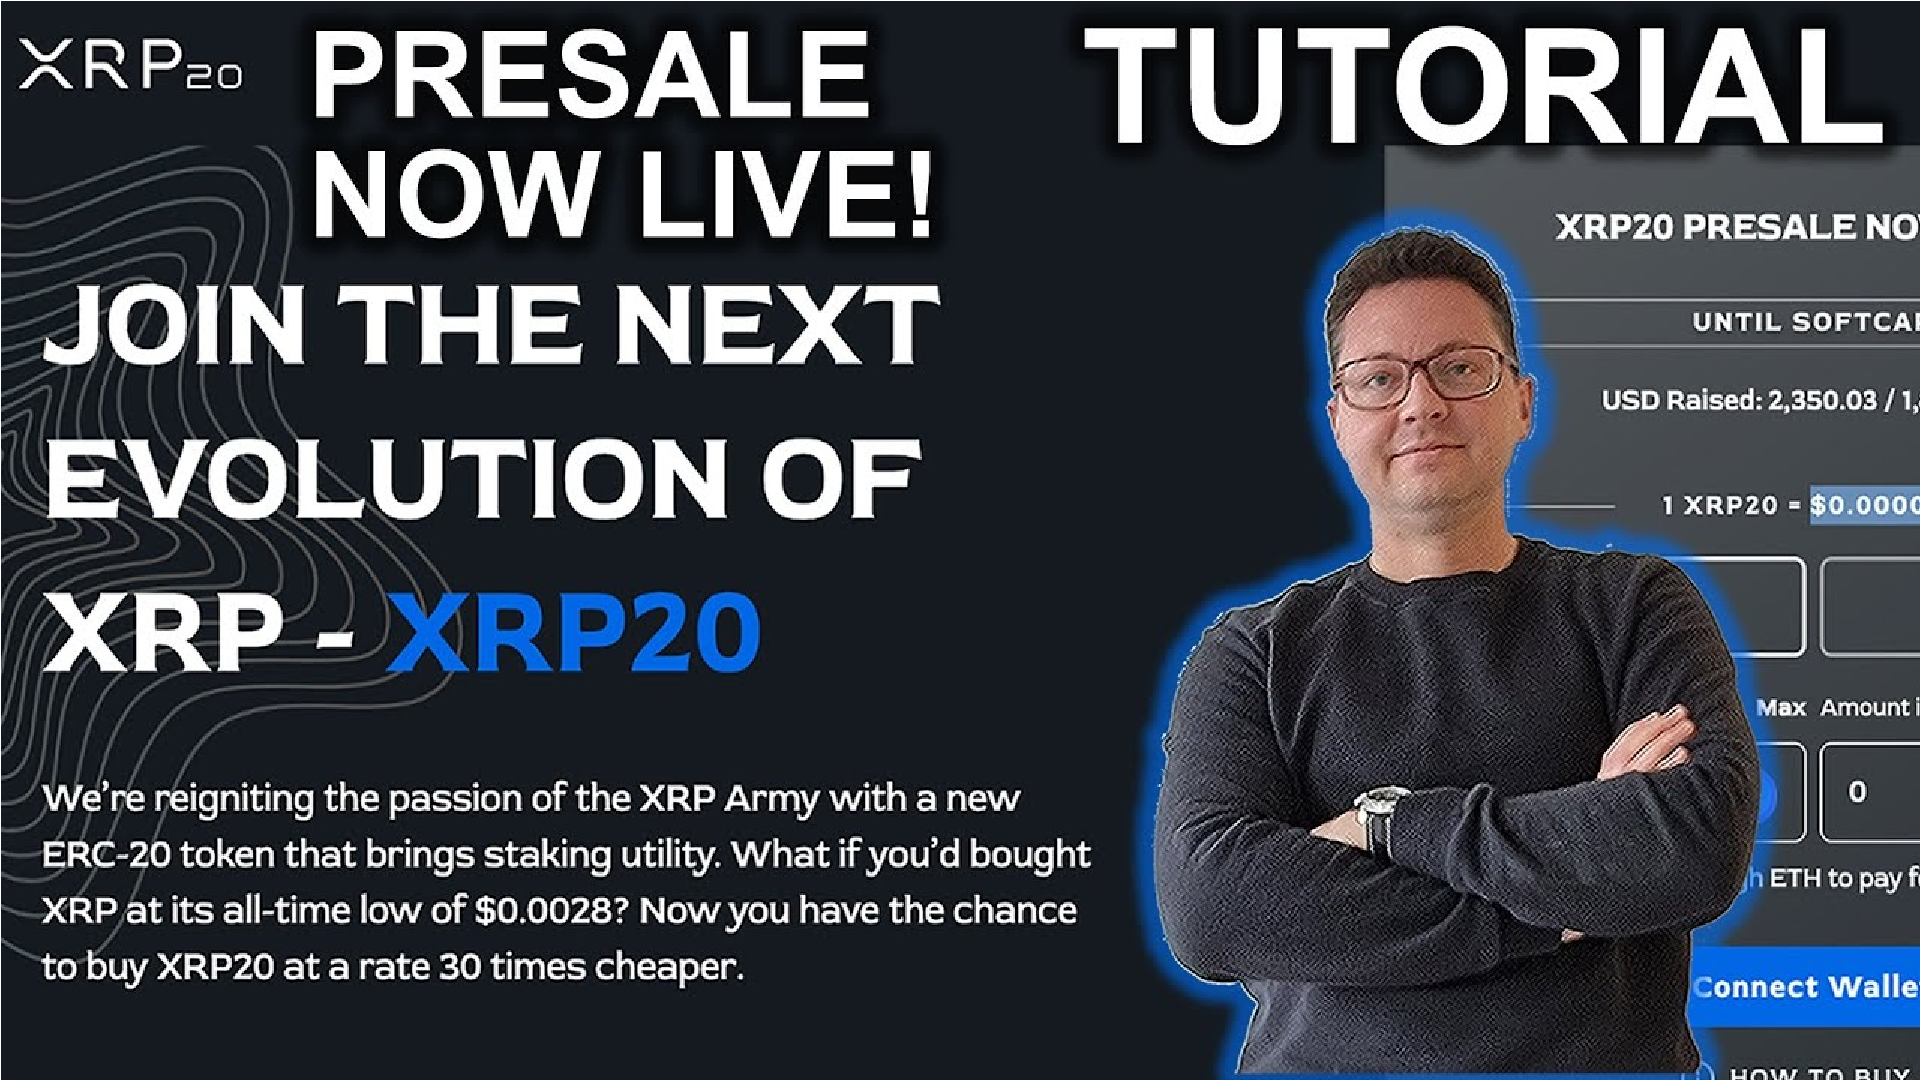 How To Buy XRP20 Presale Guide – Alessandro De Crypto Reviews ‘The New XRP’